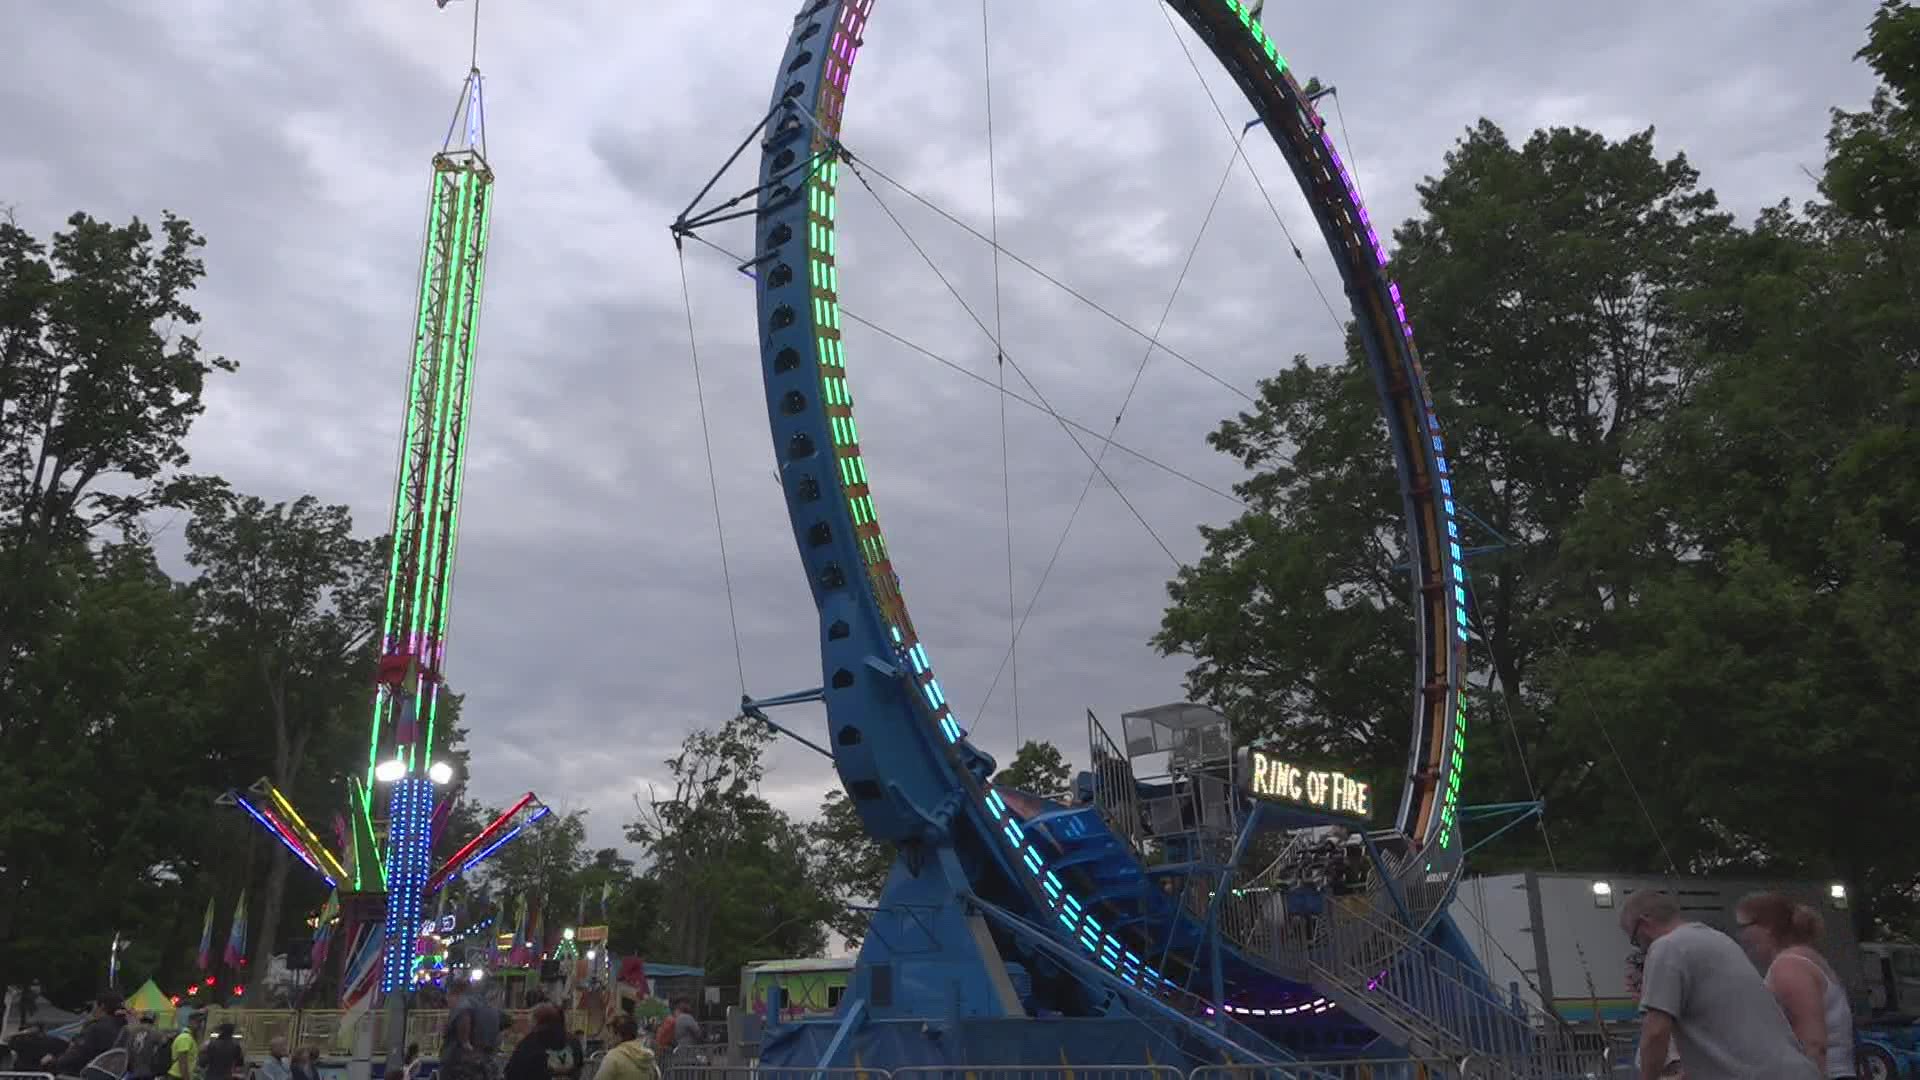 Riders stuck as Sand Lake carnival ride breaks down Friday night